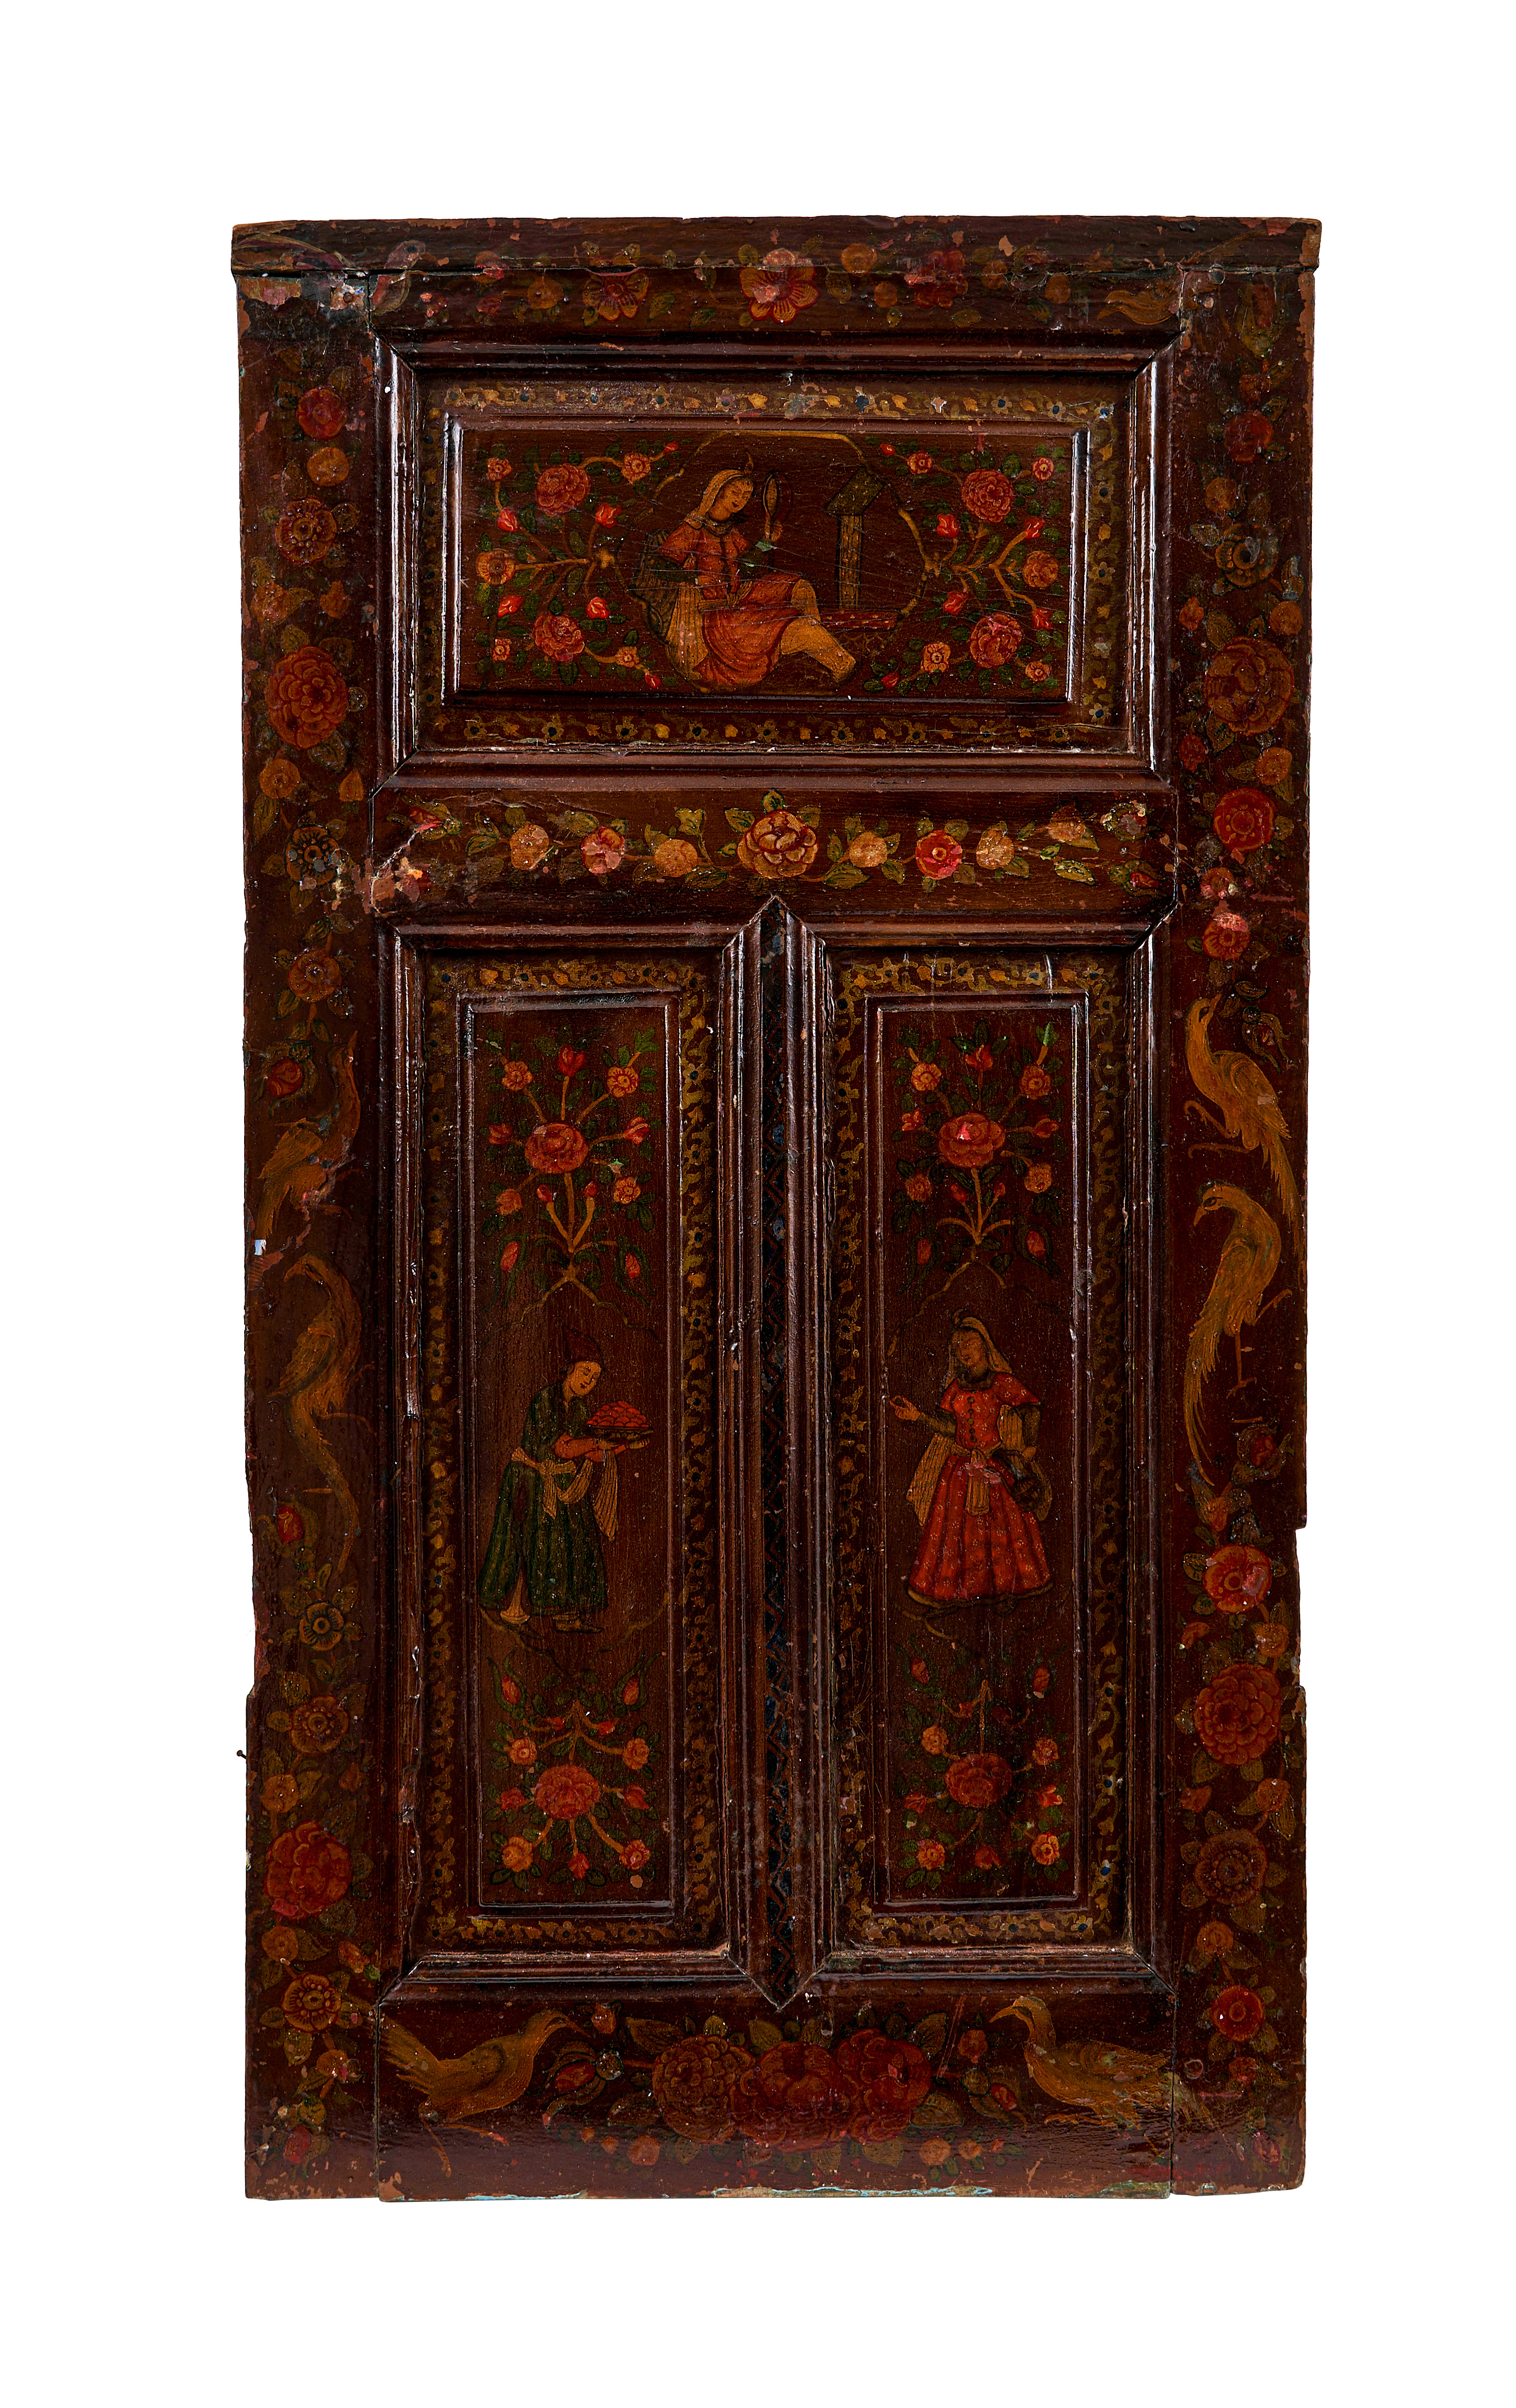 A PAIR OF QAJAR PAINTED AND GESSO APPLIED WOODEN DOORS, 19TH CENTURY, PERSIA - Image 4 of 4